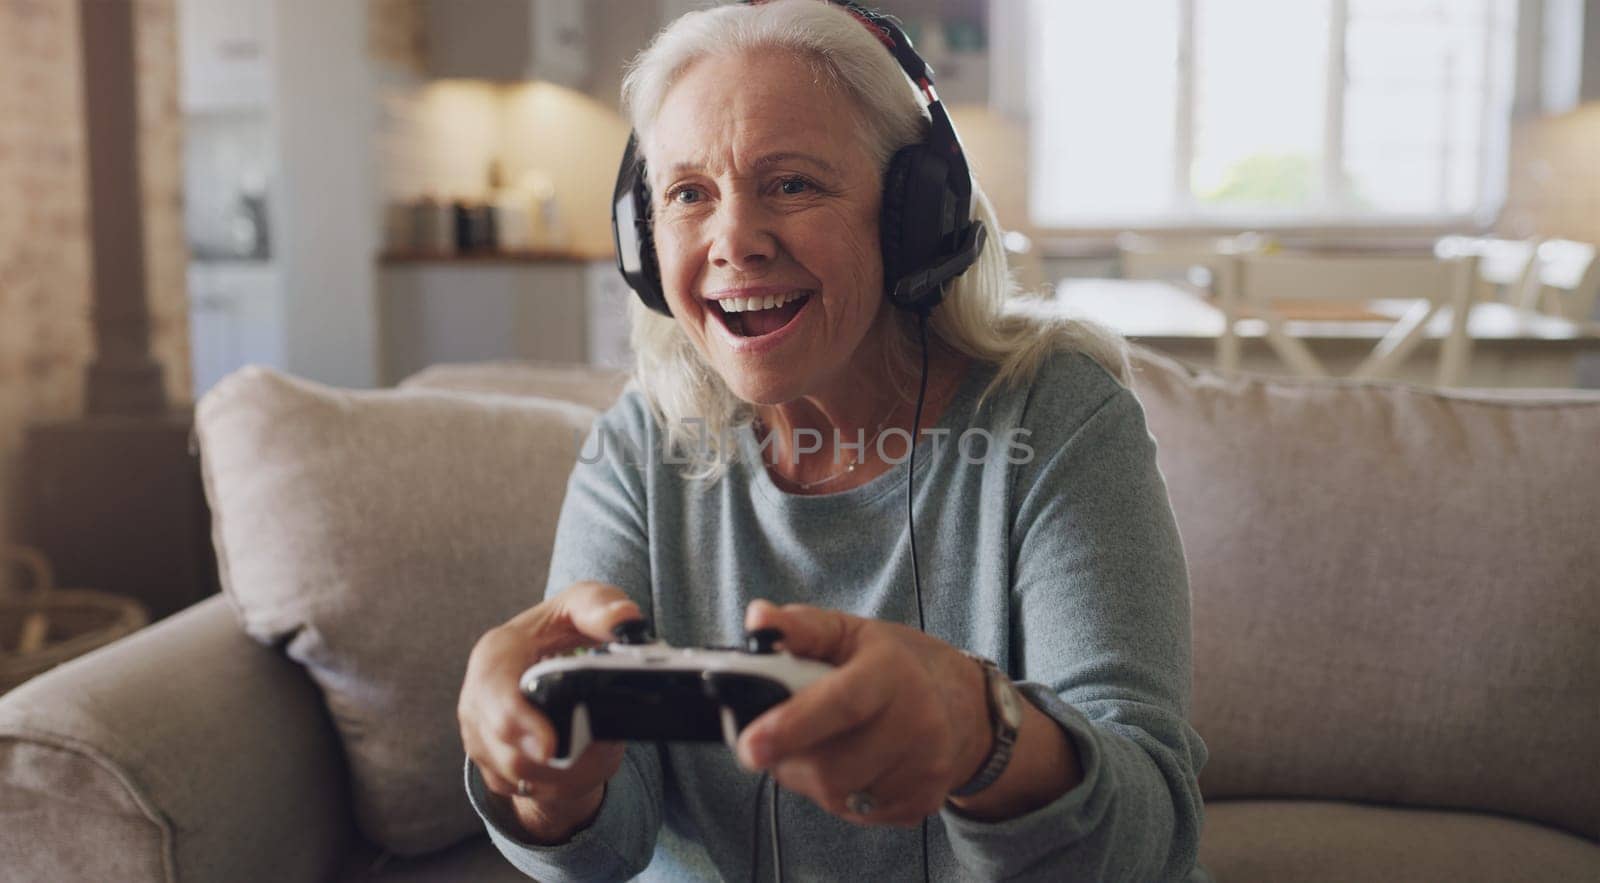 Headphones, senior woman and joystick for video game, online streaming and relax for retirement at home. Technology, elderly person and happiness with smile from esports, gaming and challenge on sofa.